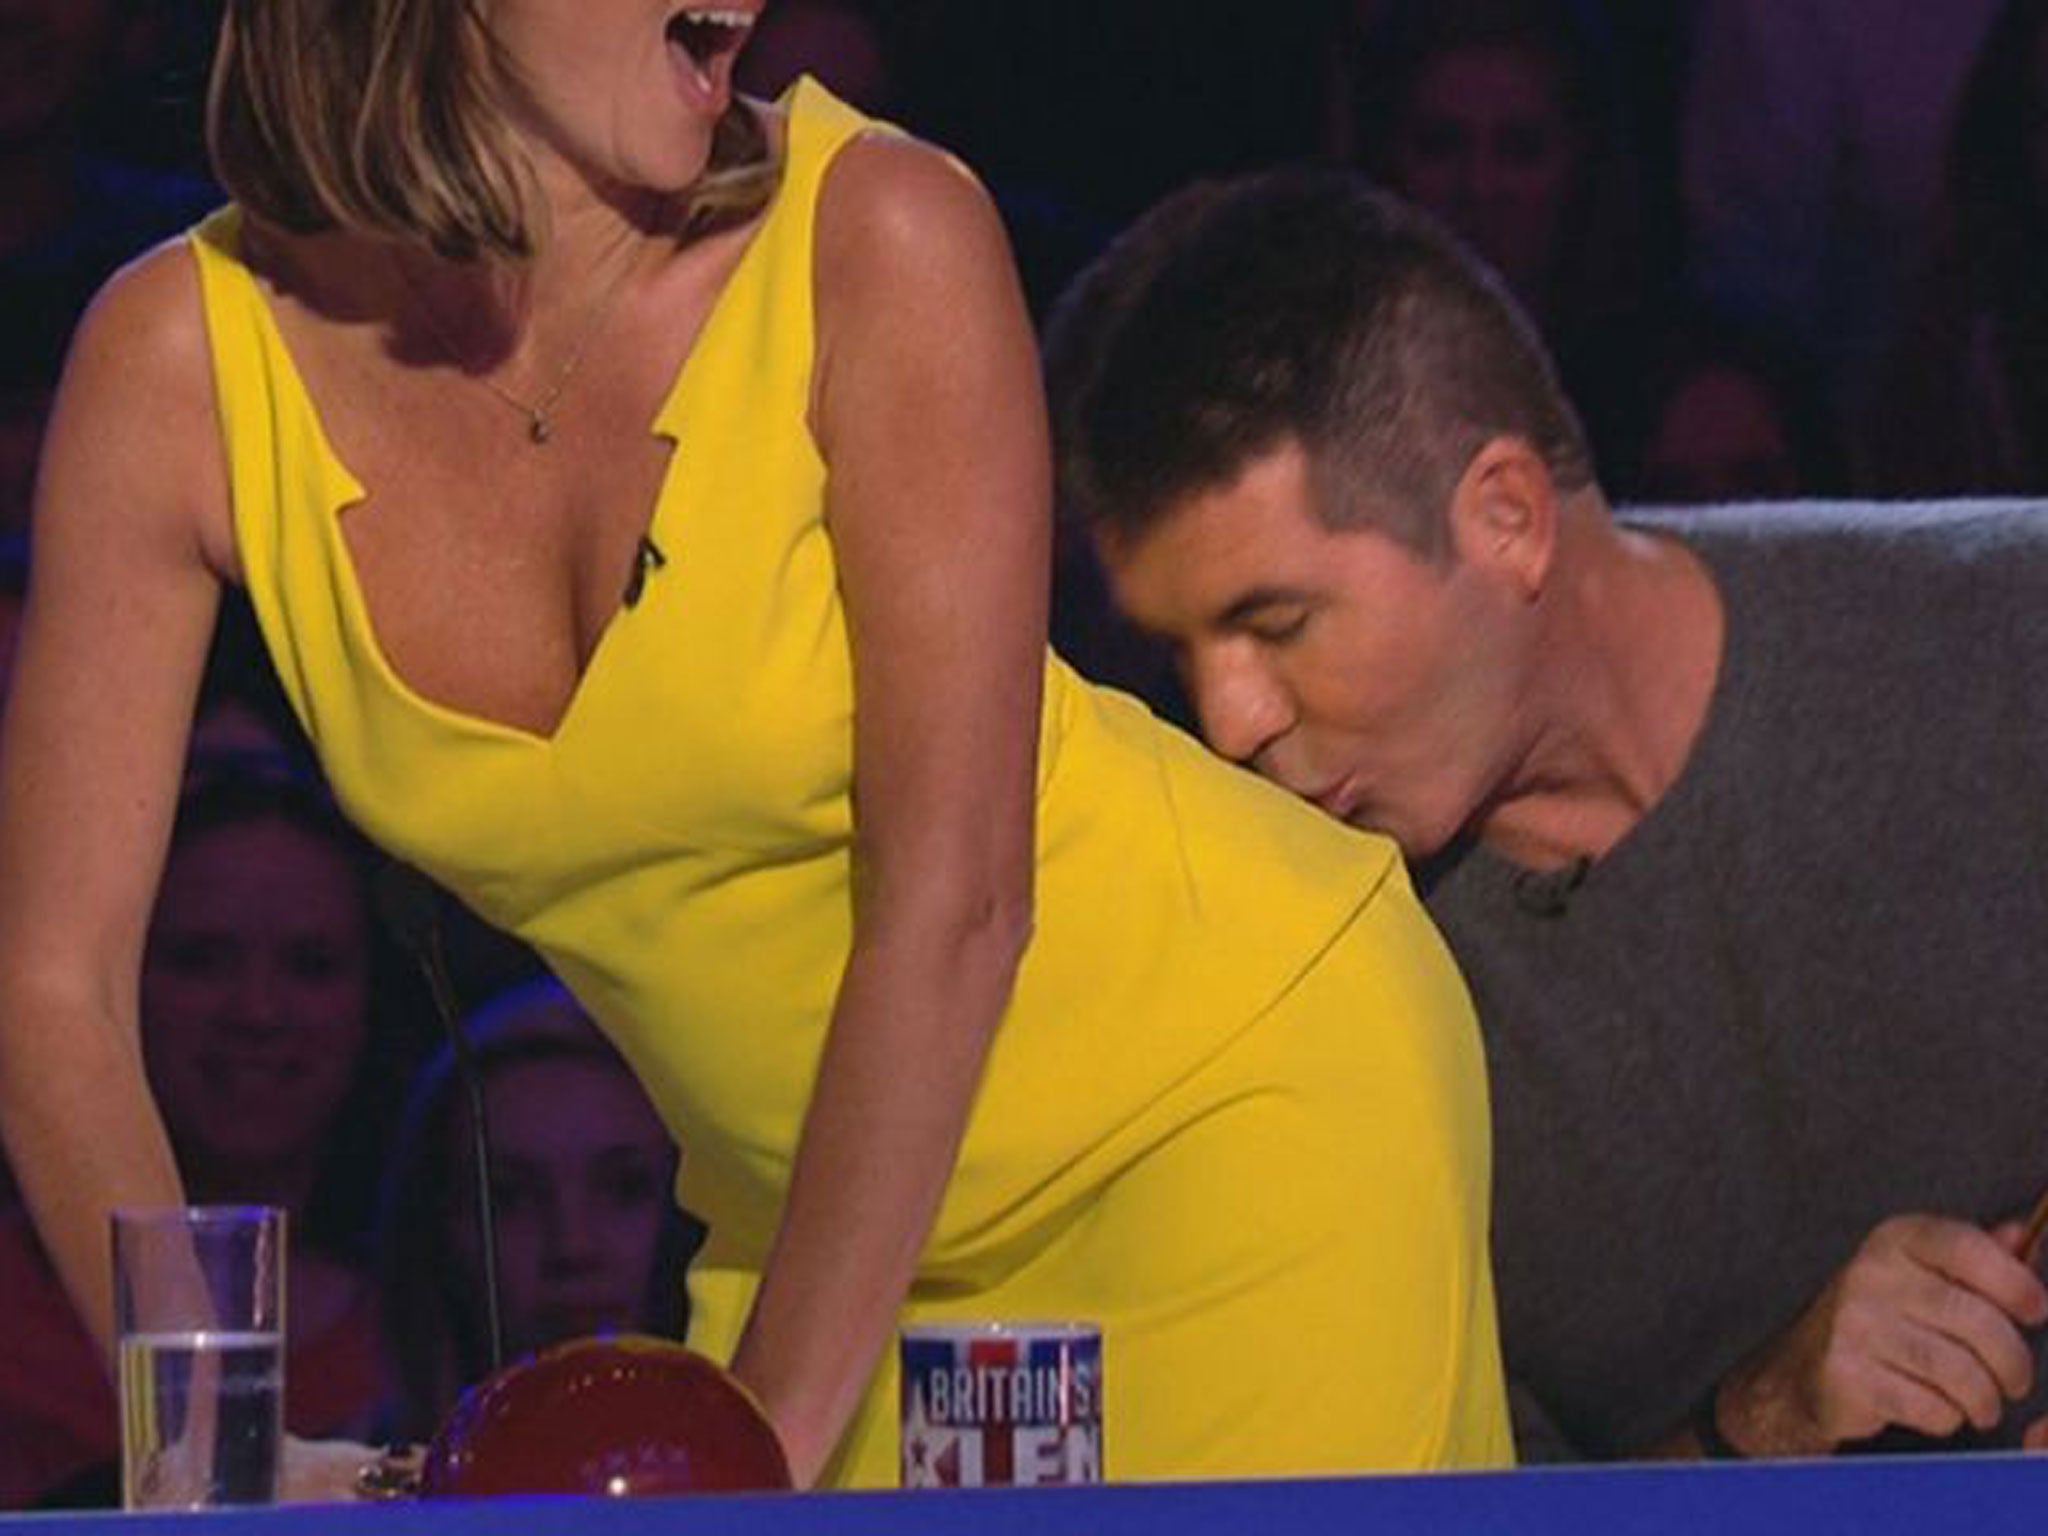 Simon Cowell (right) kissing Amanda Holden during filming of the ITV programme Britain's Got Talent